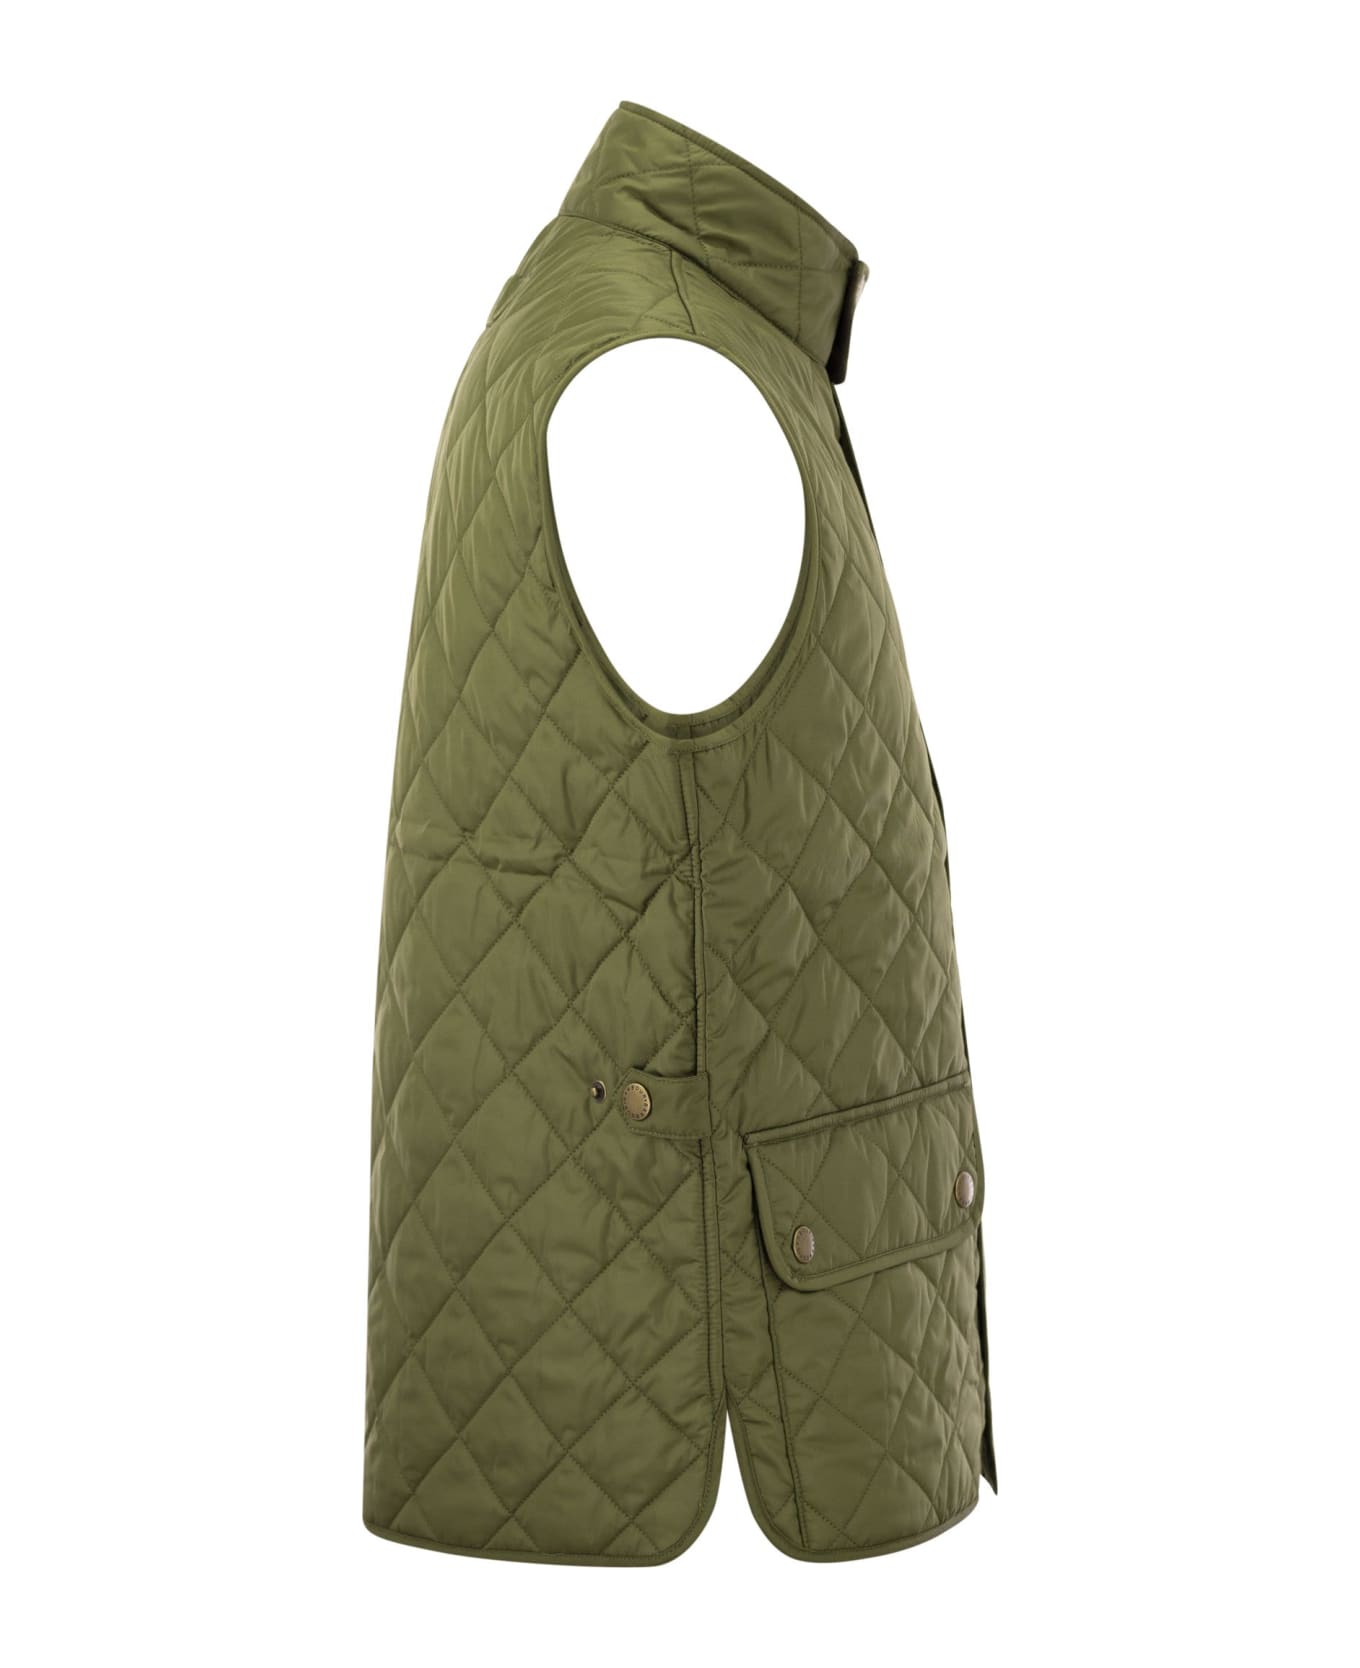 Barbour Lowerdale - Quilted Vest - Olive Green ベスト